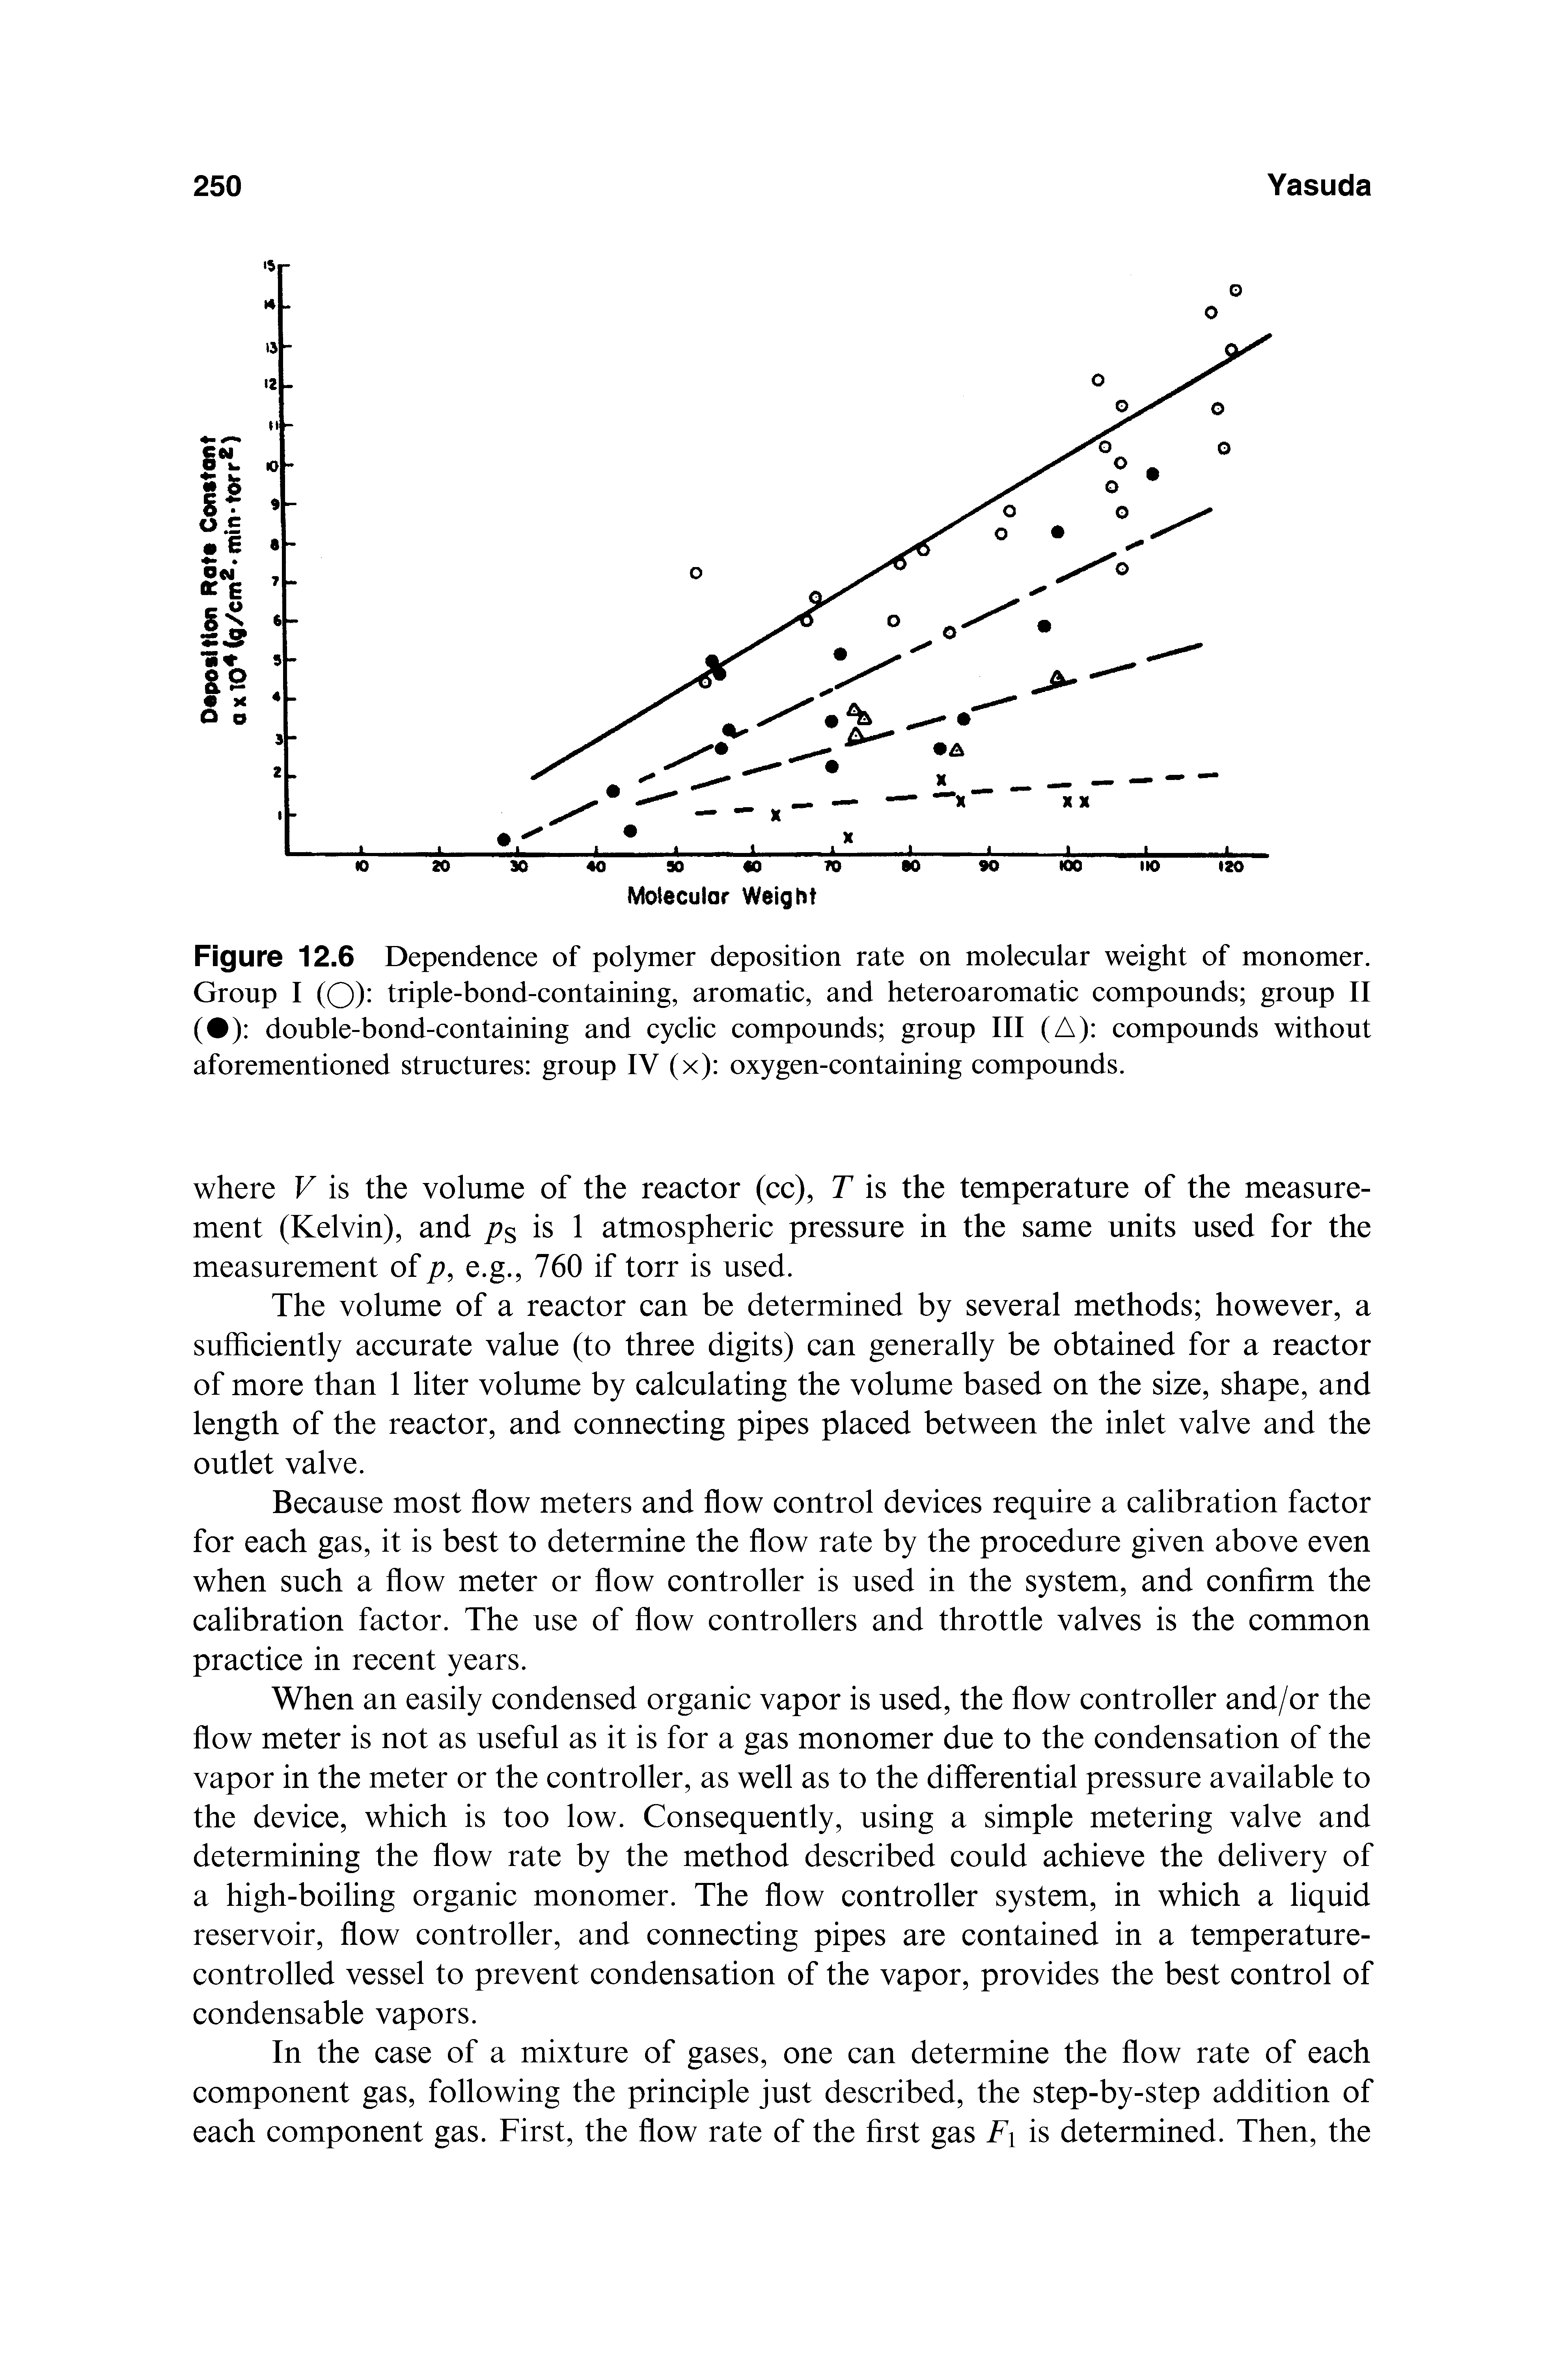 Figure 12.6 Dependence of polymer deposition rate on molecular weight of monomer. Group I (O)- triple-bond-containing, aromatic, and heteroaromatic compounds group II ( ) double-bond-containing and cyclic compounds group III (A) compounds without aforementioned structures group IV (x) oxygen-containing compounds.